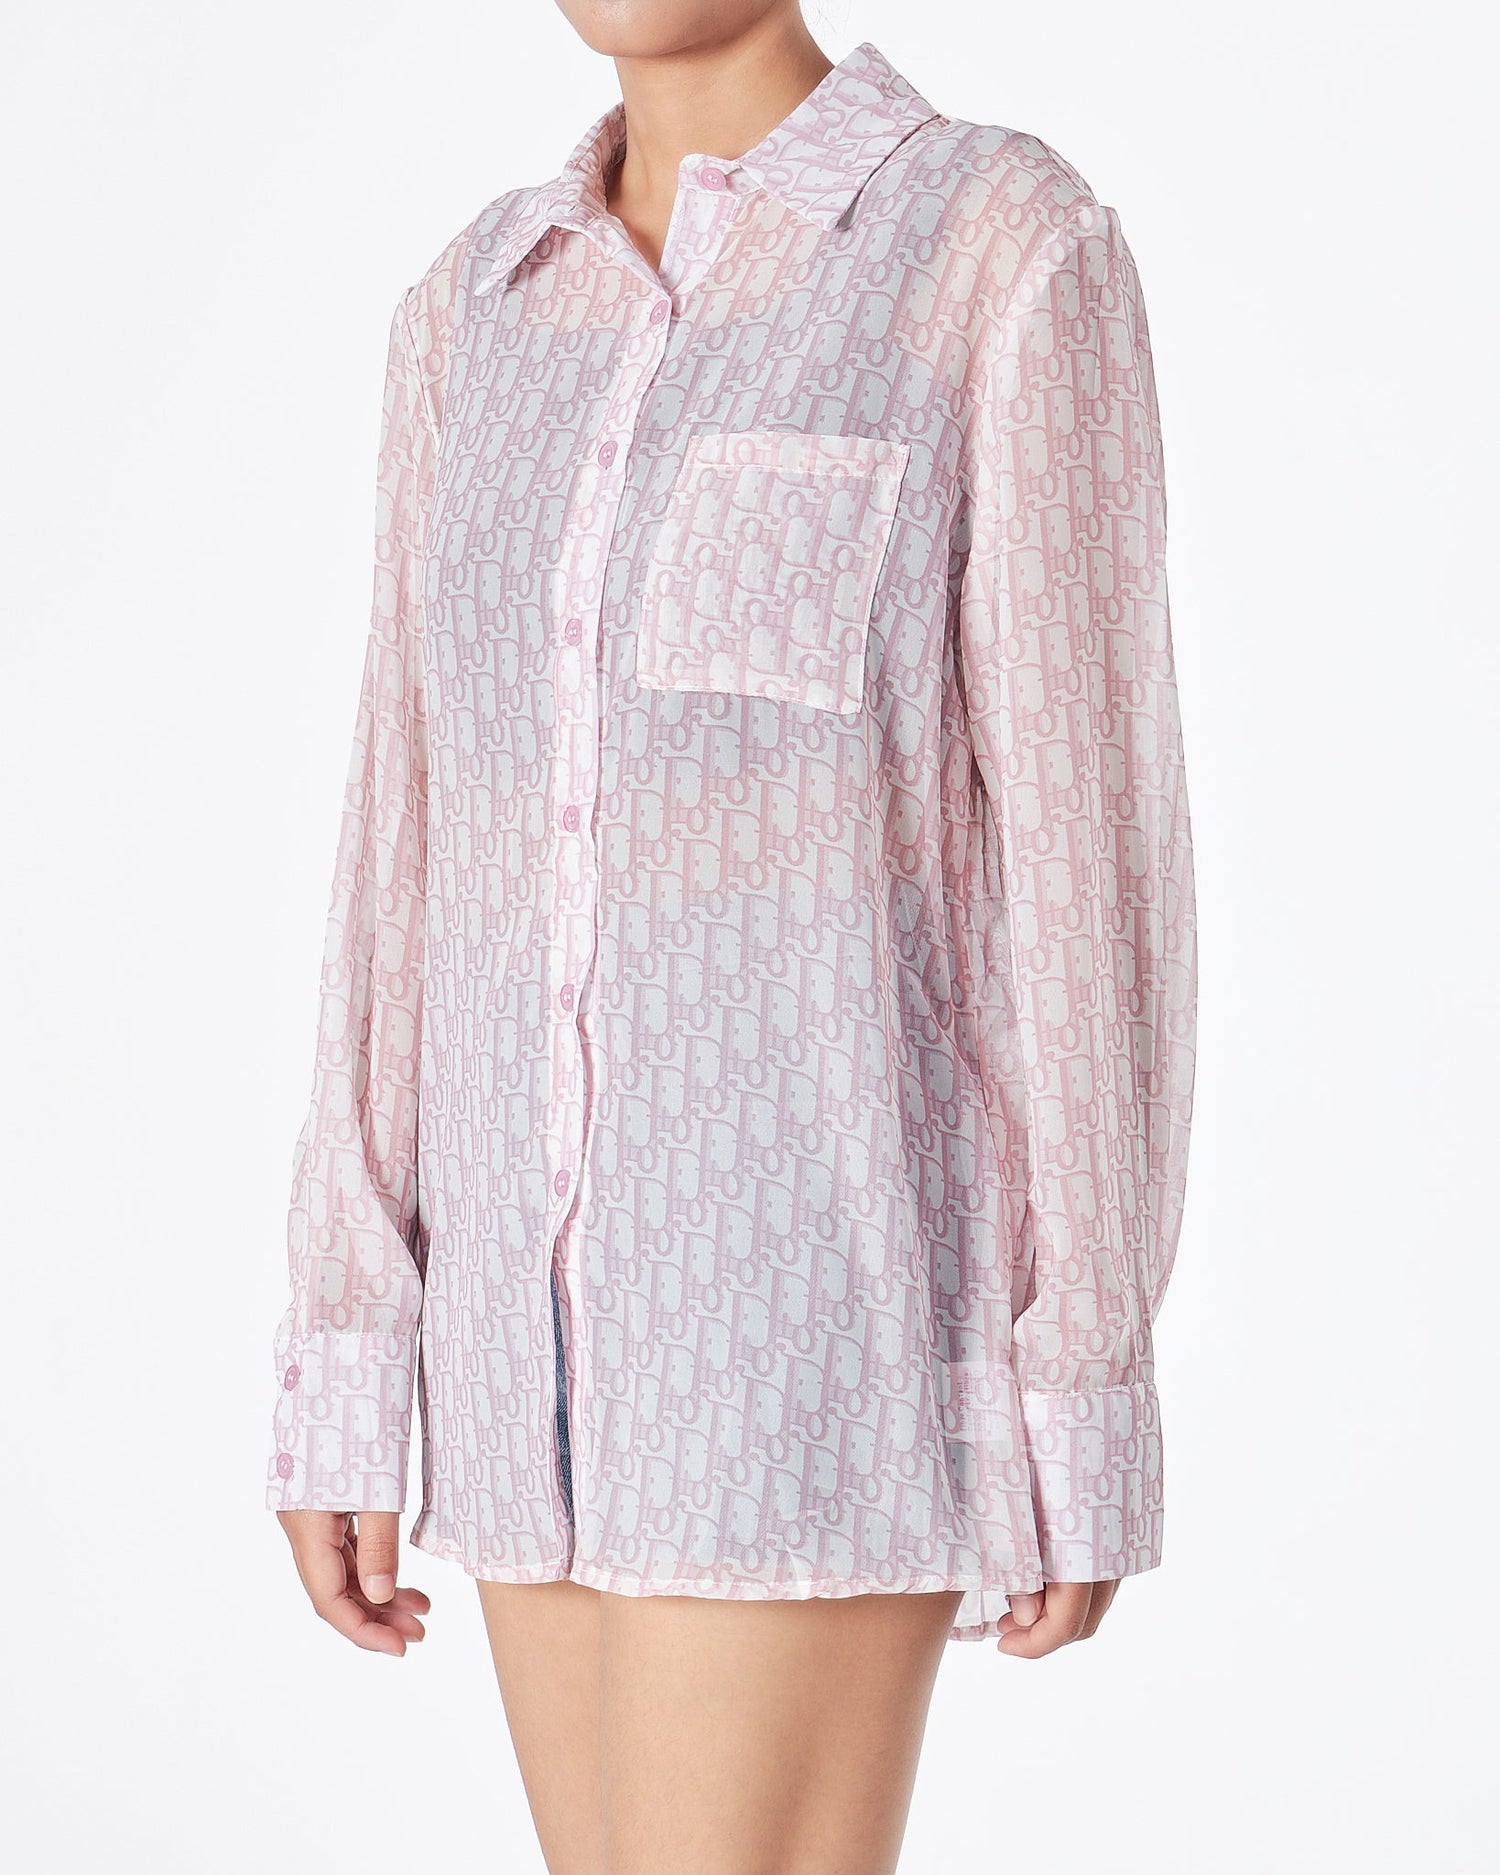 MOI OUTFIT-CD Monogram Lady Pink Shirts Long Sleeve 55.90